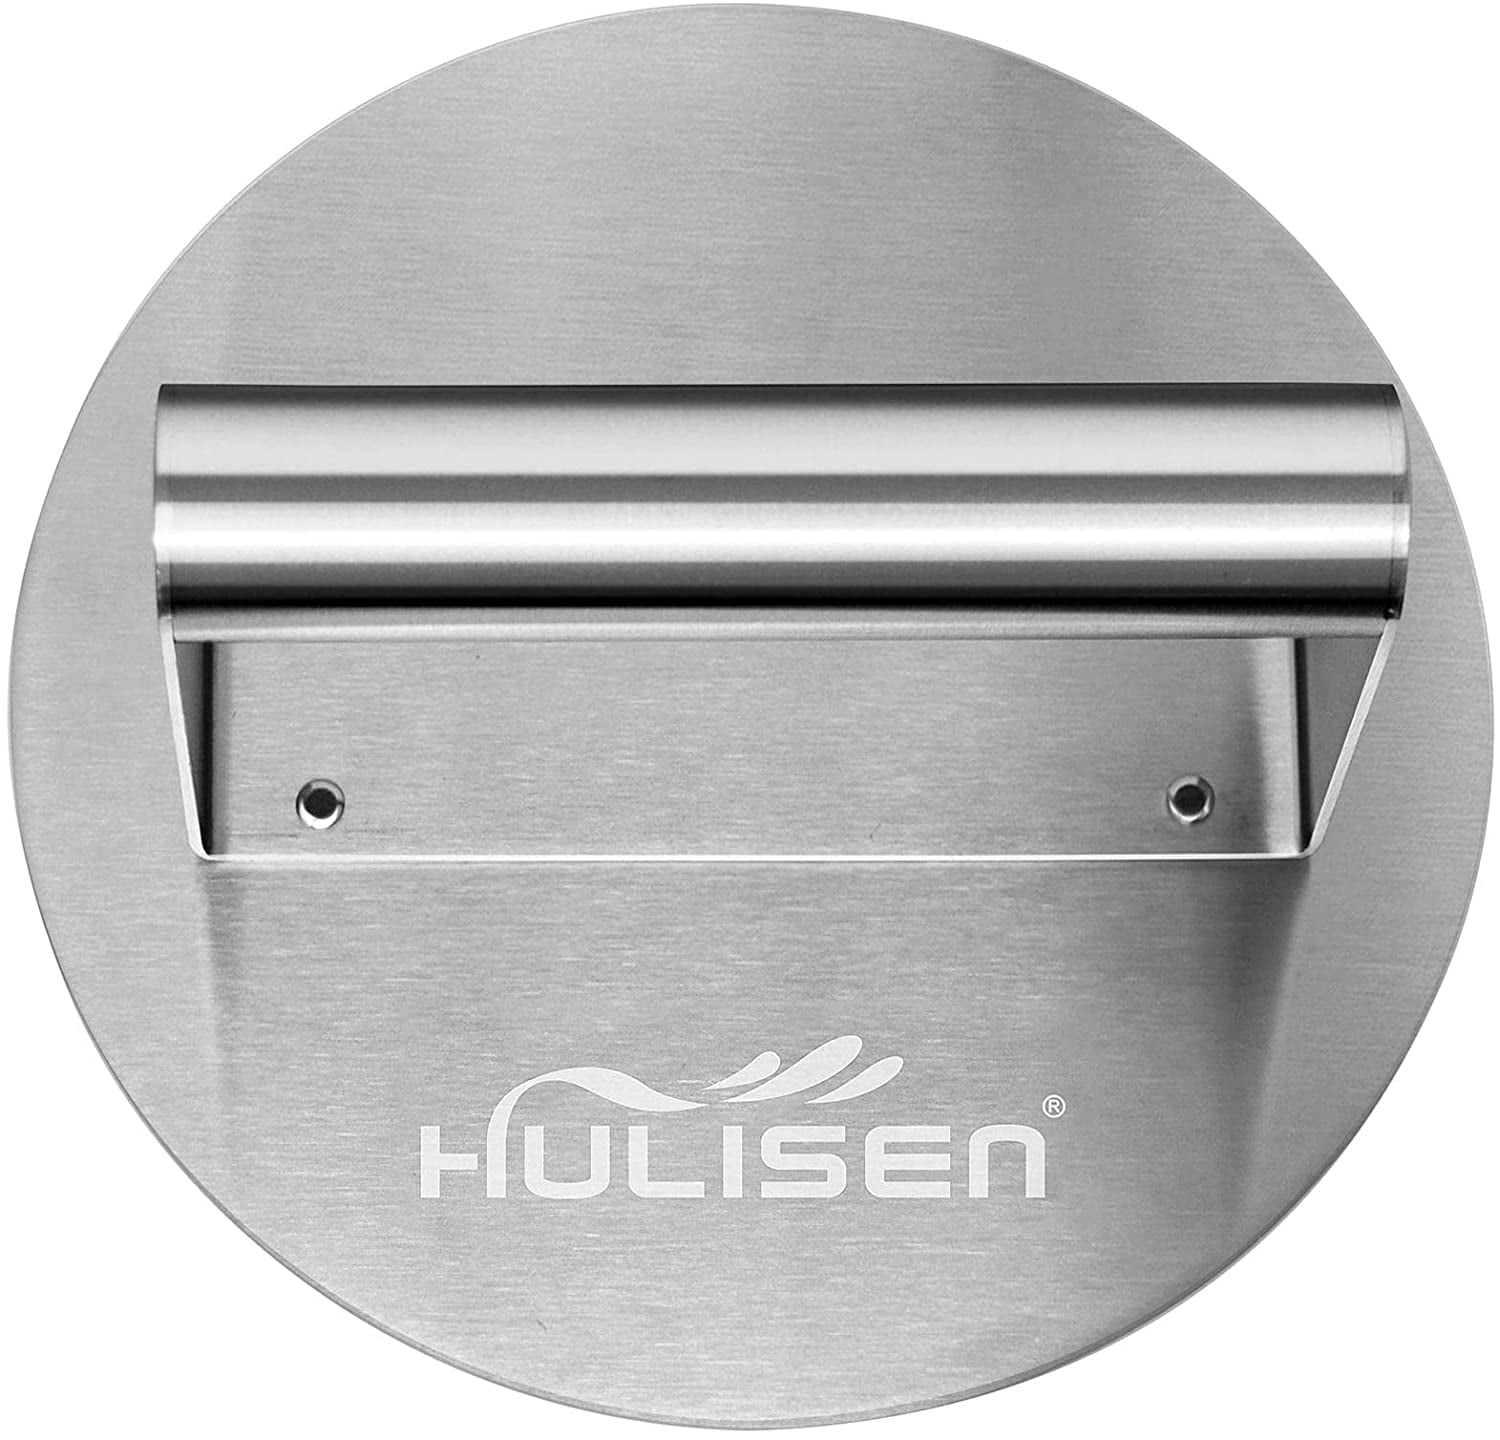 HULISEN Burger Press Kit, Stainless Steel Burger Smasher and Grill Bur —  Grill Parts America